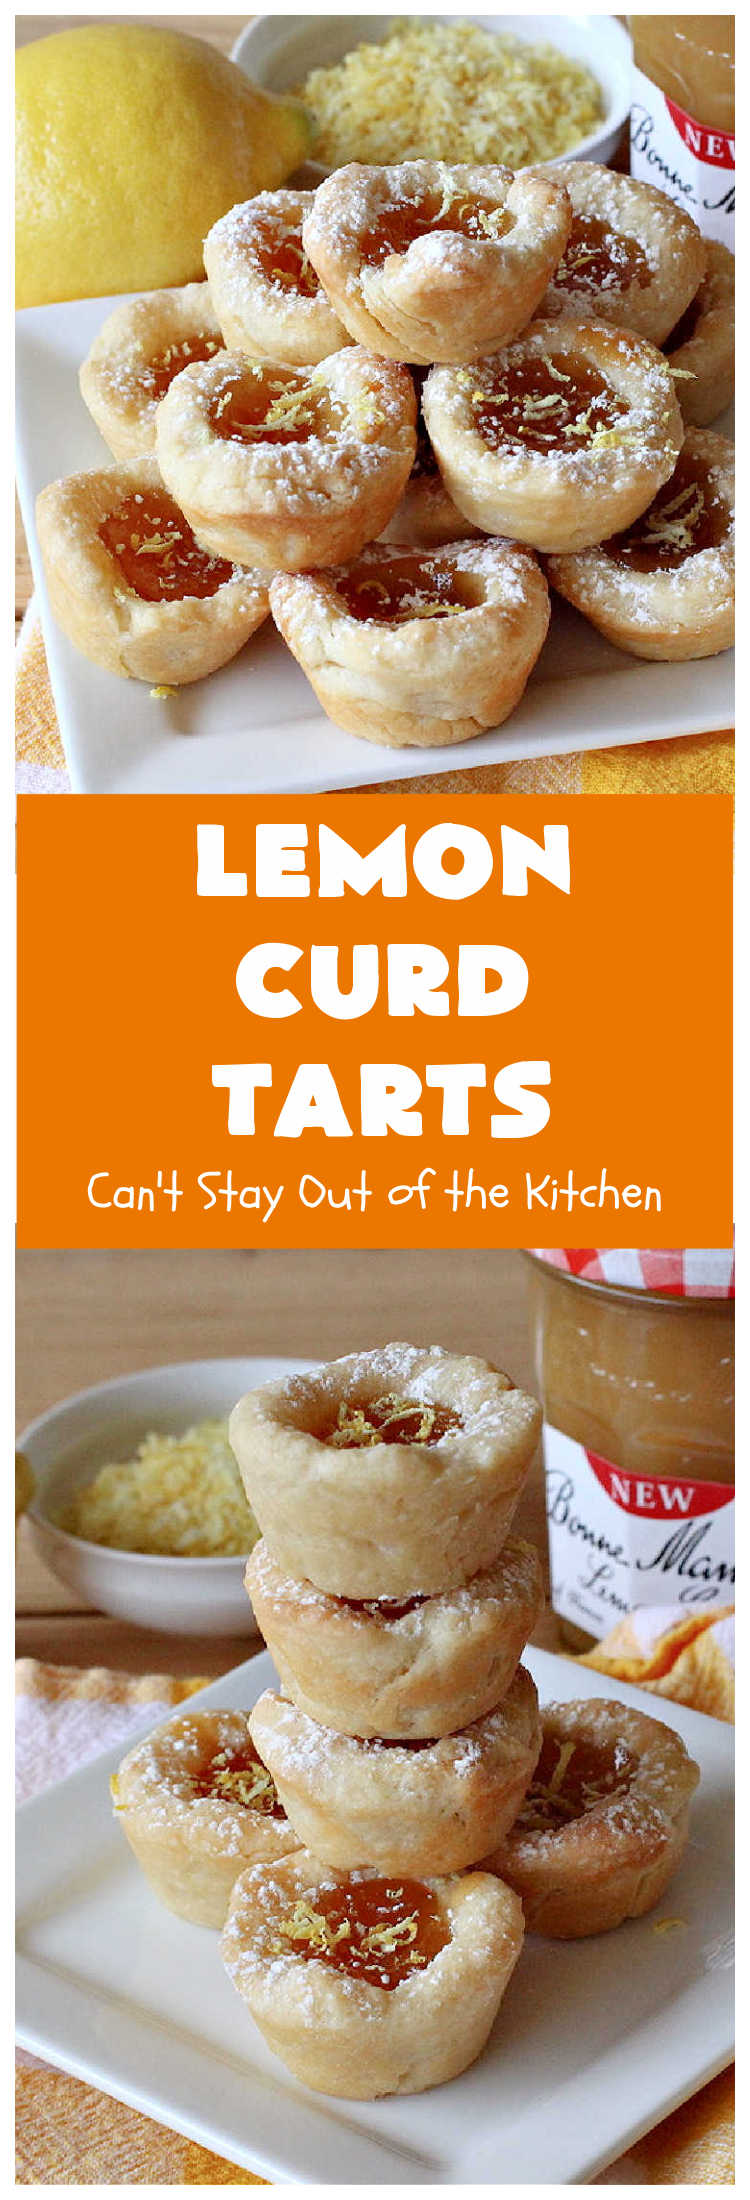 Lemon Curd Tarts | Can't Stay Out of the Kitchen | This awesome 6 ingredient #recipe is perfect for #holiday #baking & #ChristmasCookieExchanges. These festive #cookies are filled with #LemonCurd & are absolutely delightful. Every bite will have you drooling! #lemons #dessert #LemonDessert #LemonCurdTarts